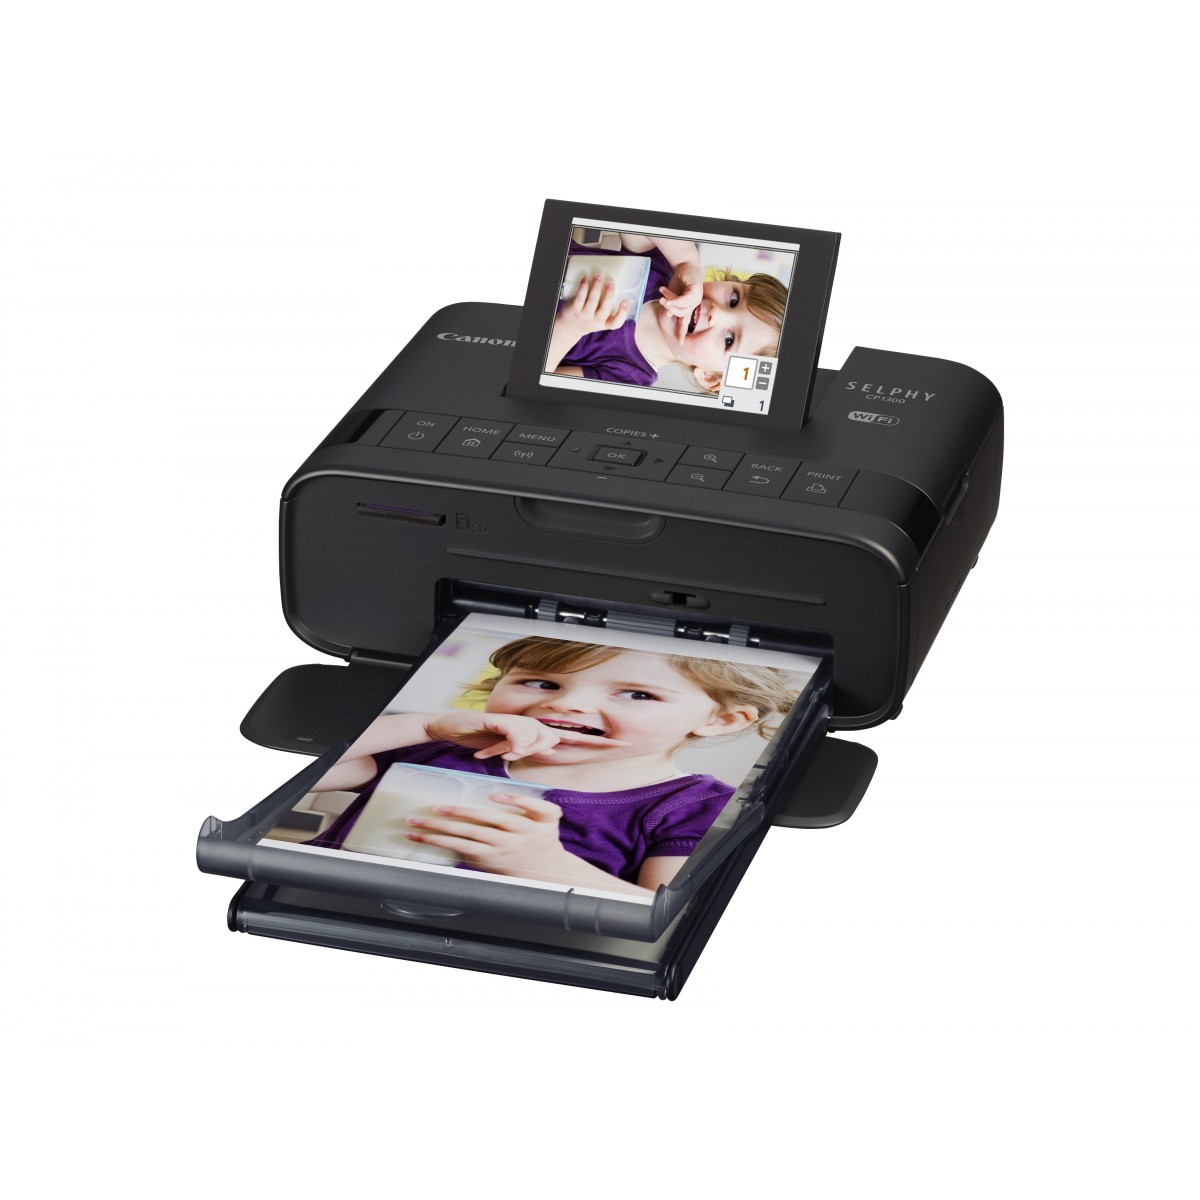 Canon SELPHY CP1300 - Dye-sublimation - 300 x 300 DPI - 4 x 6 (10x15 cm) - Borderless printing - Wi-Fi - Direct printing